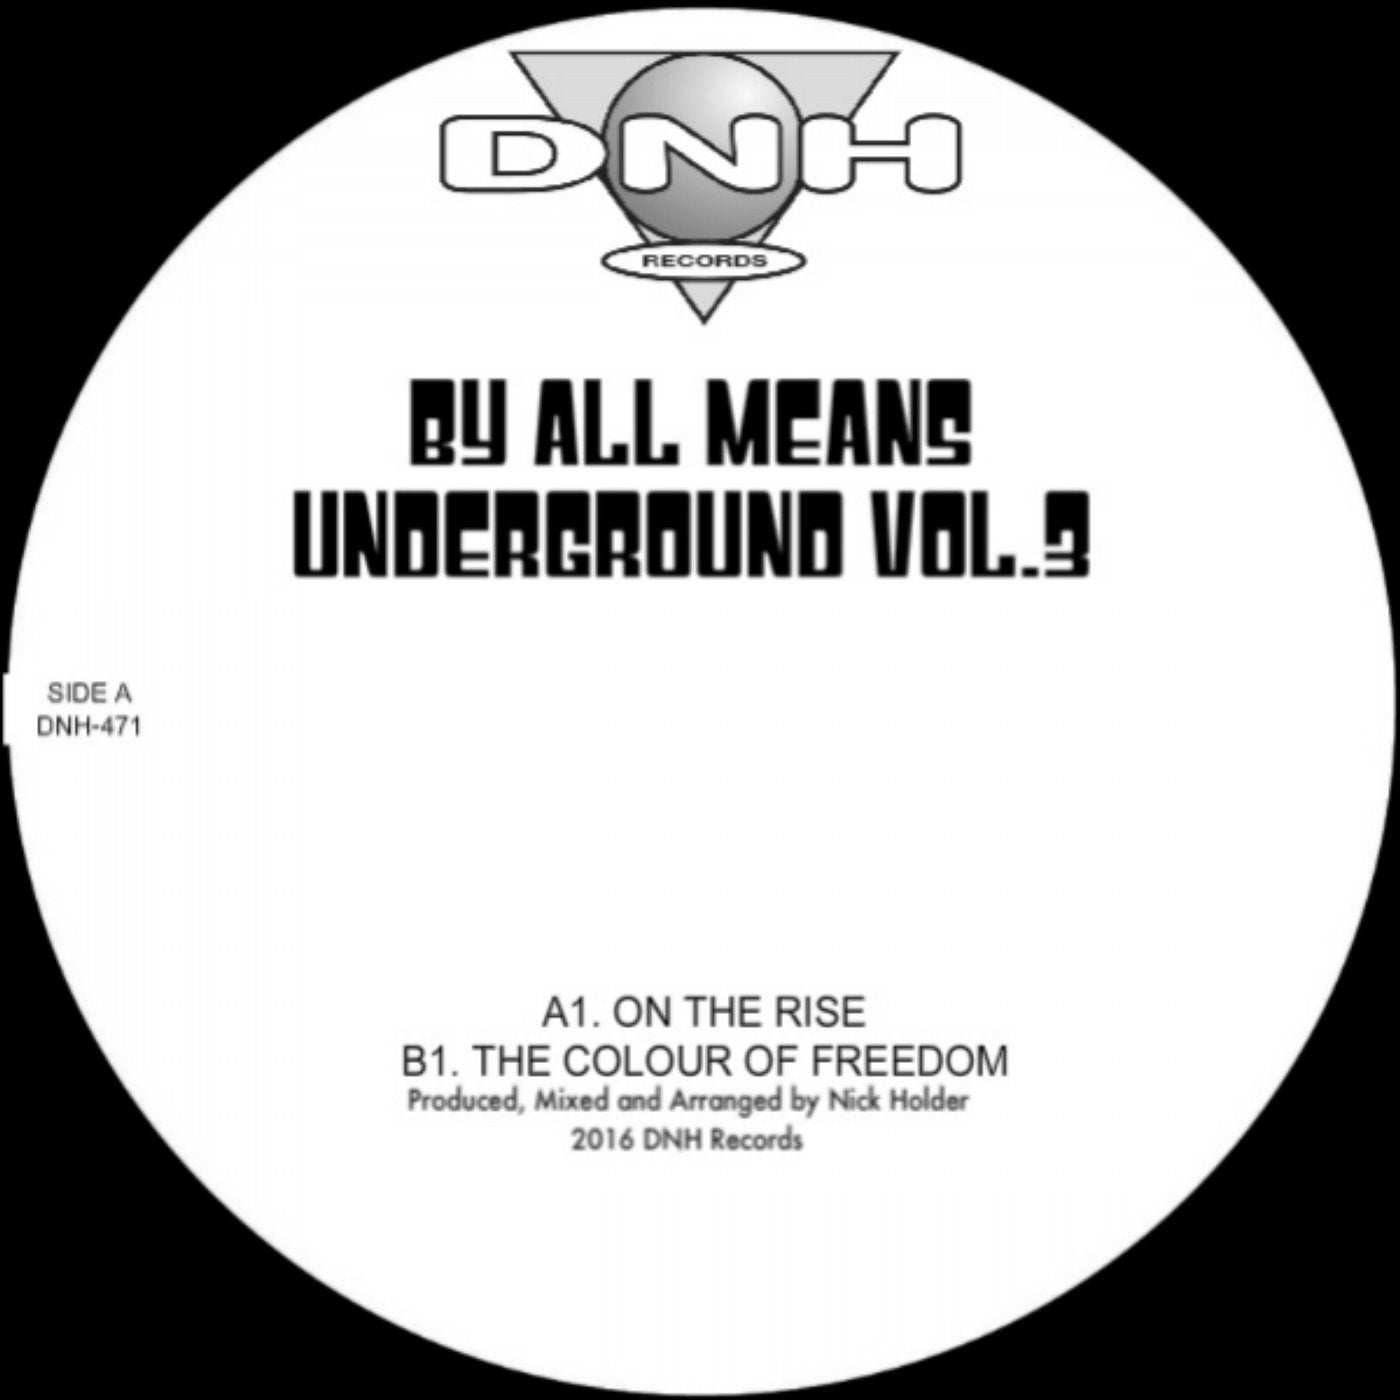 By All Means Underground Vol.3